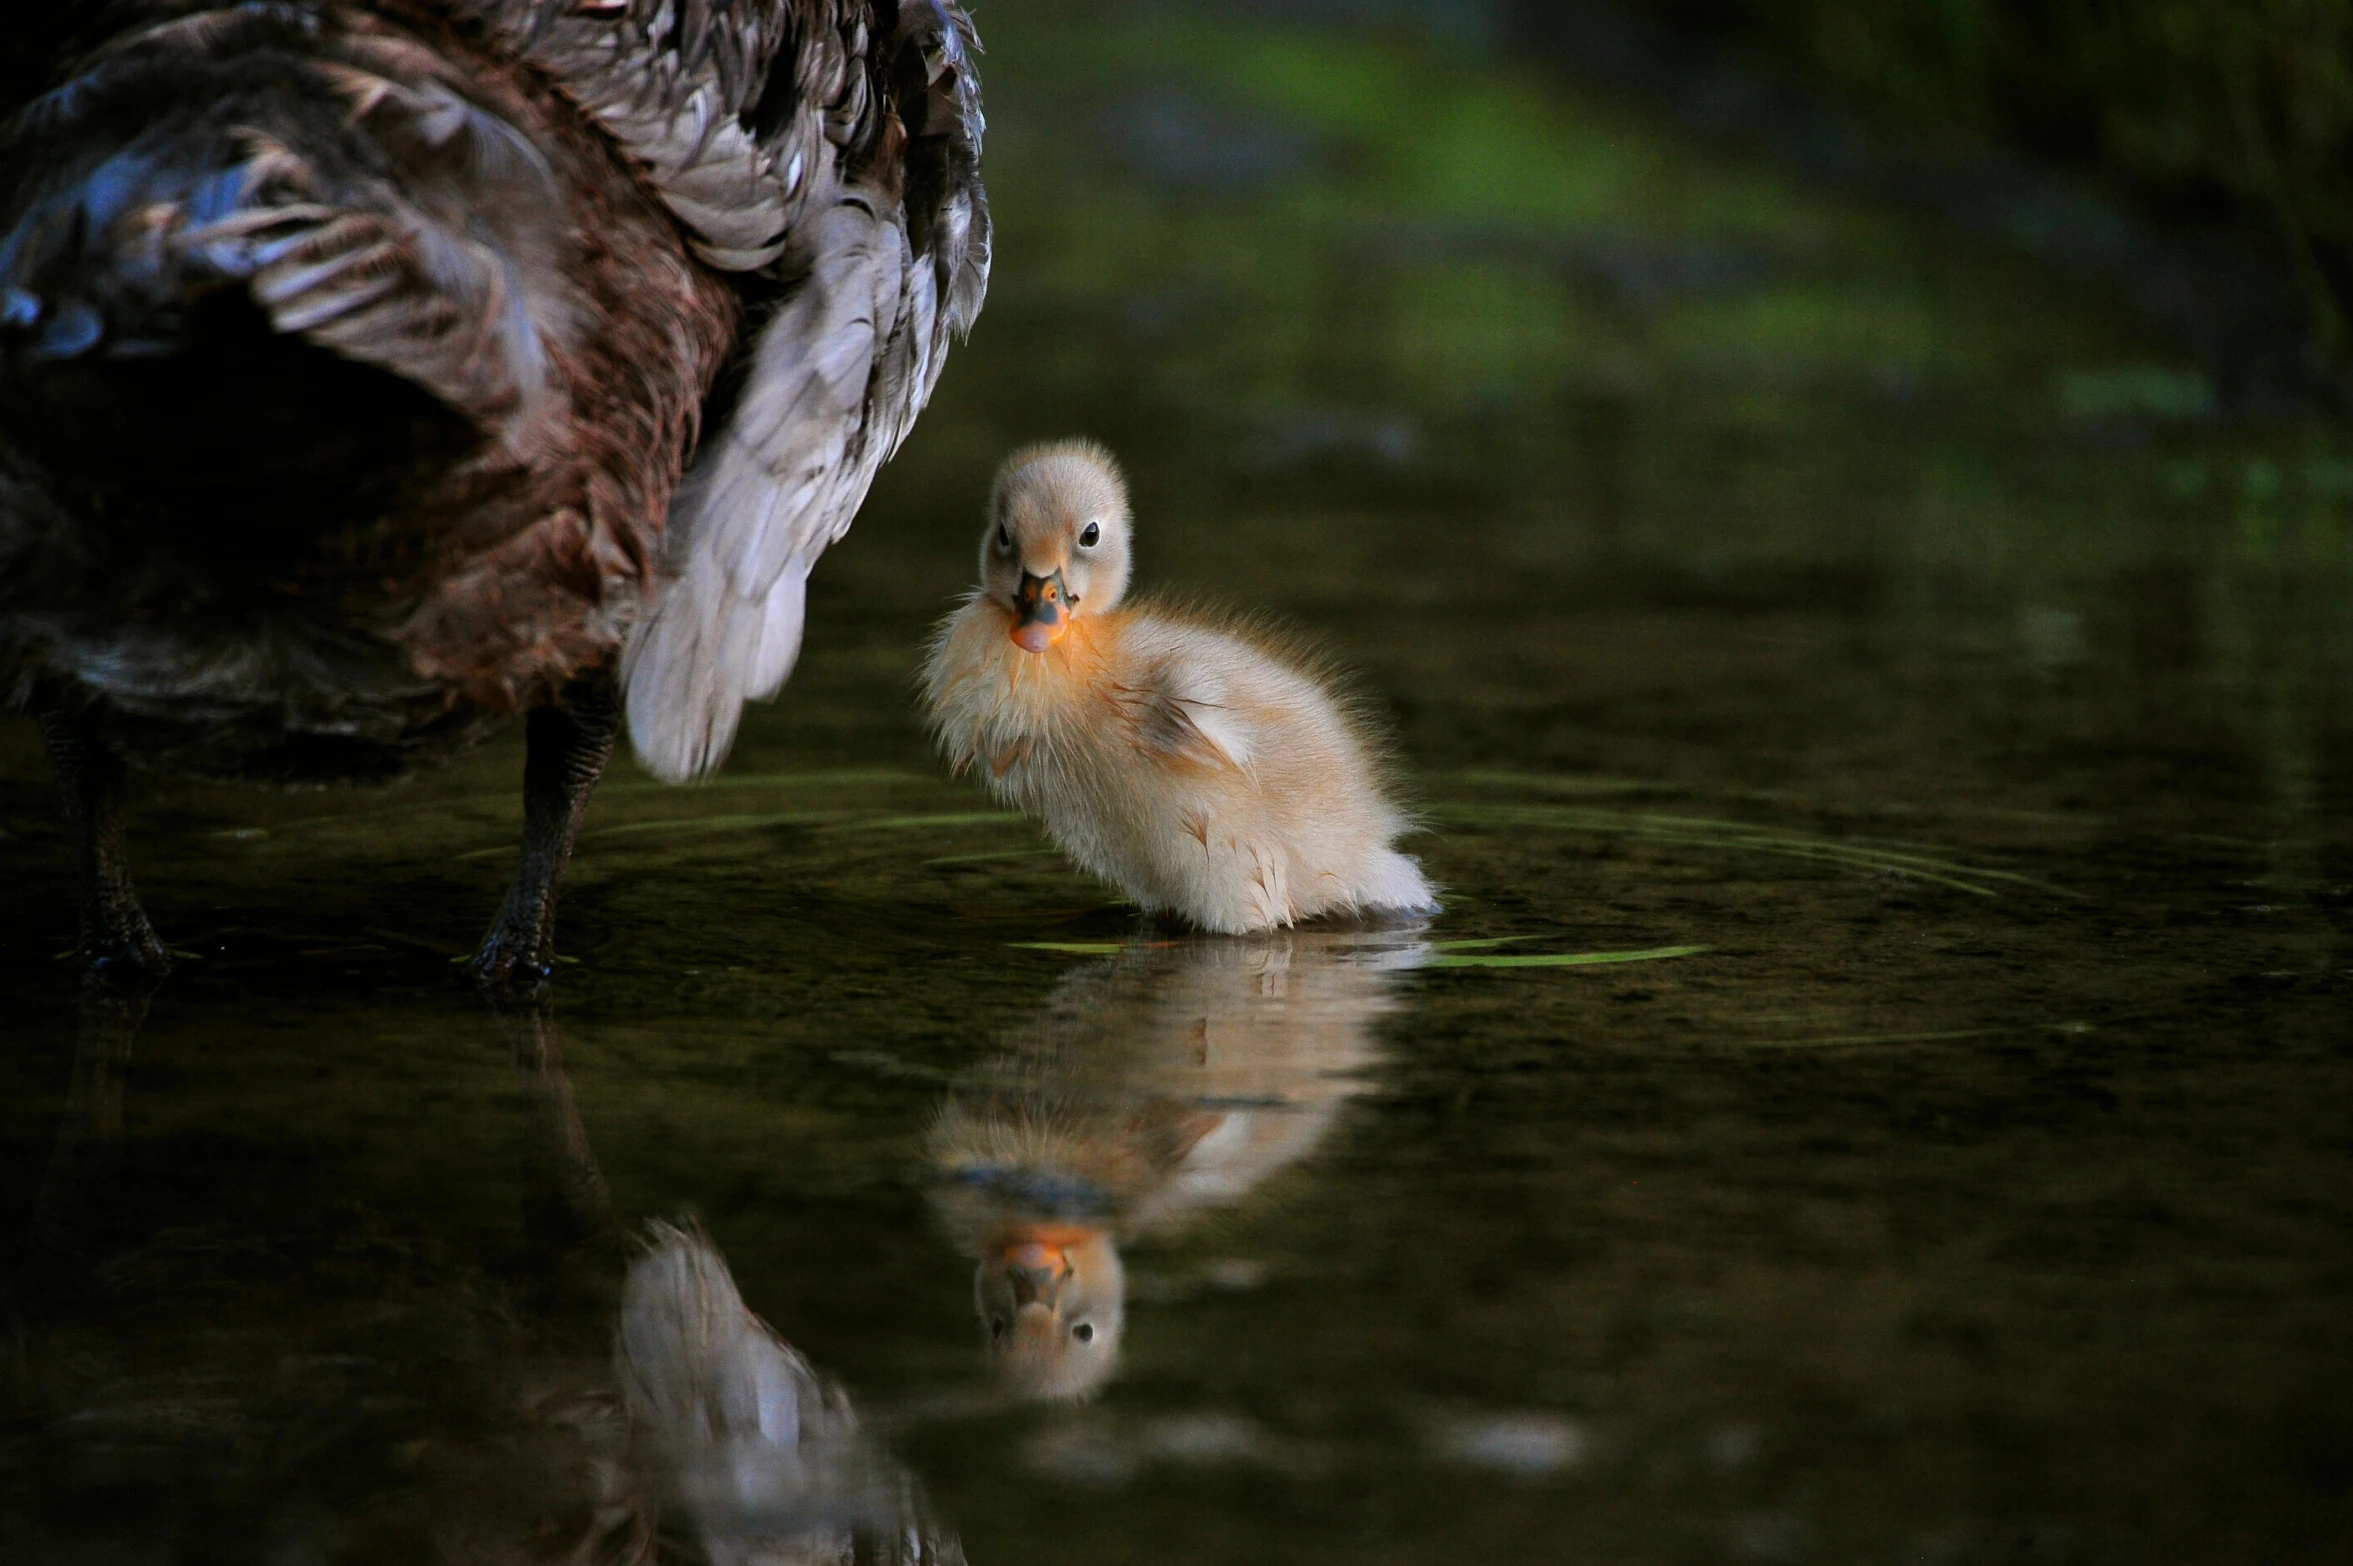 small duckling on wet surface near adult duck